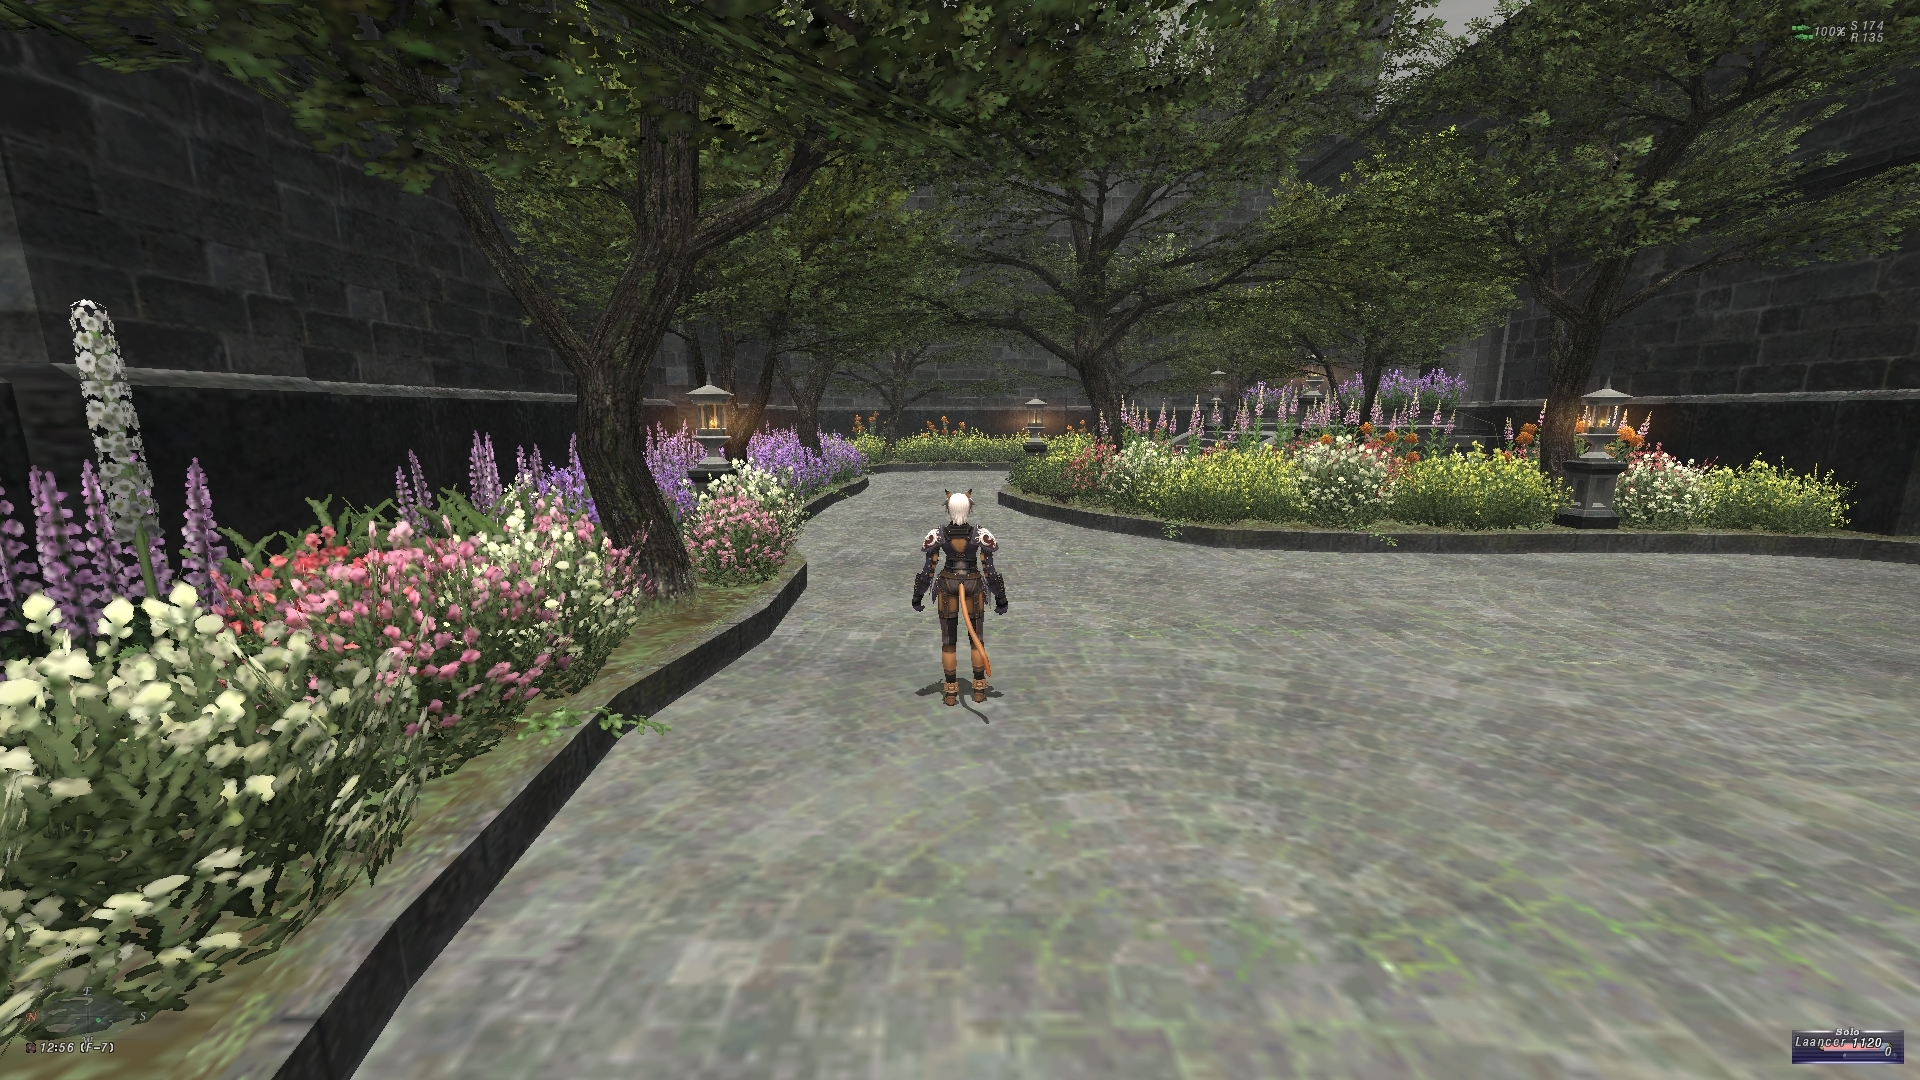 videogame avatar stands with back to camera in brick-floored garden.